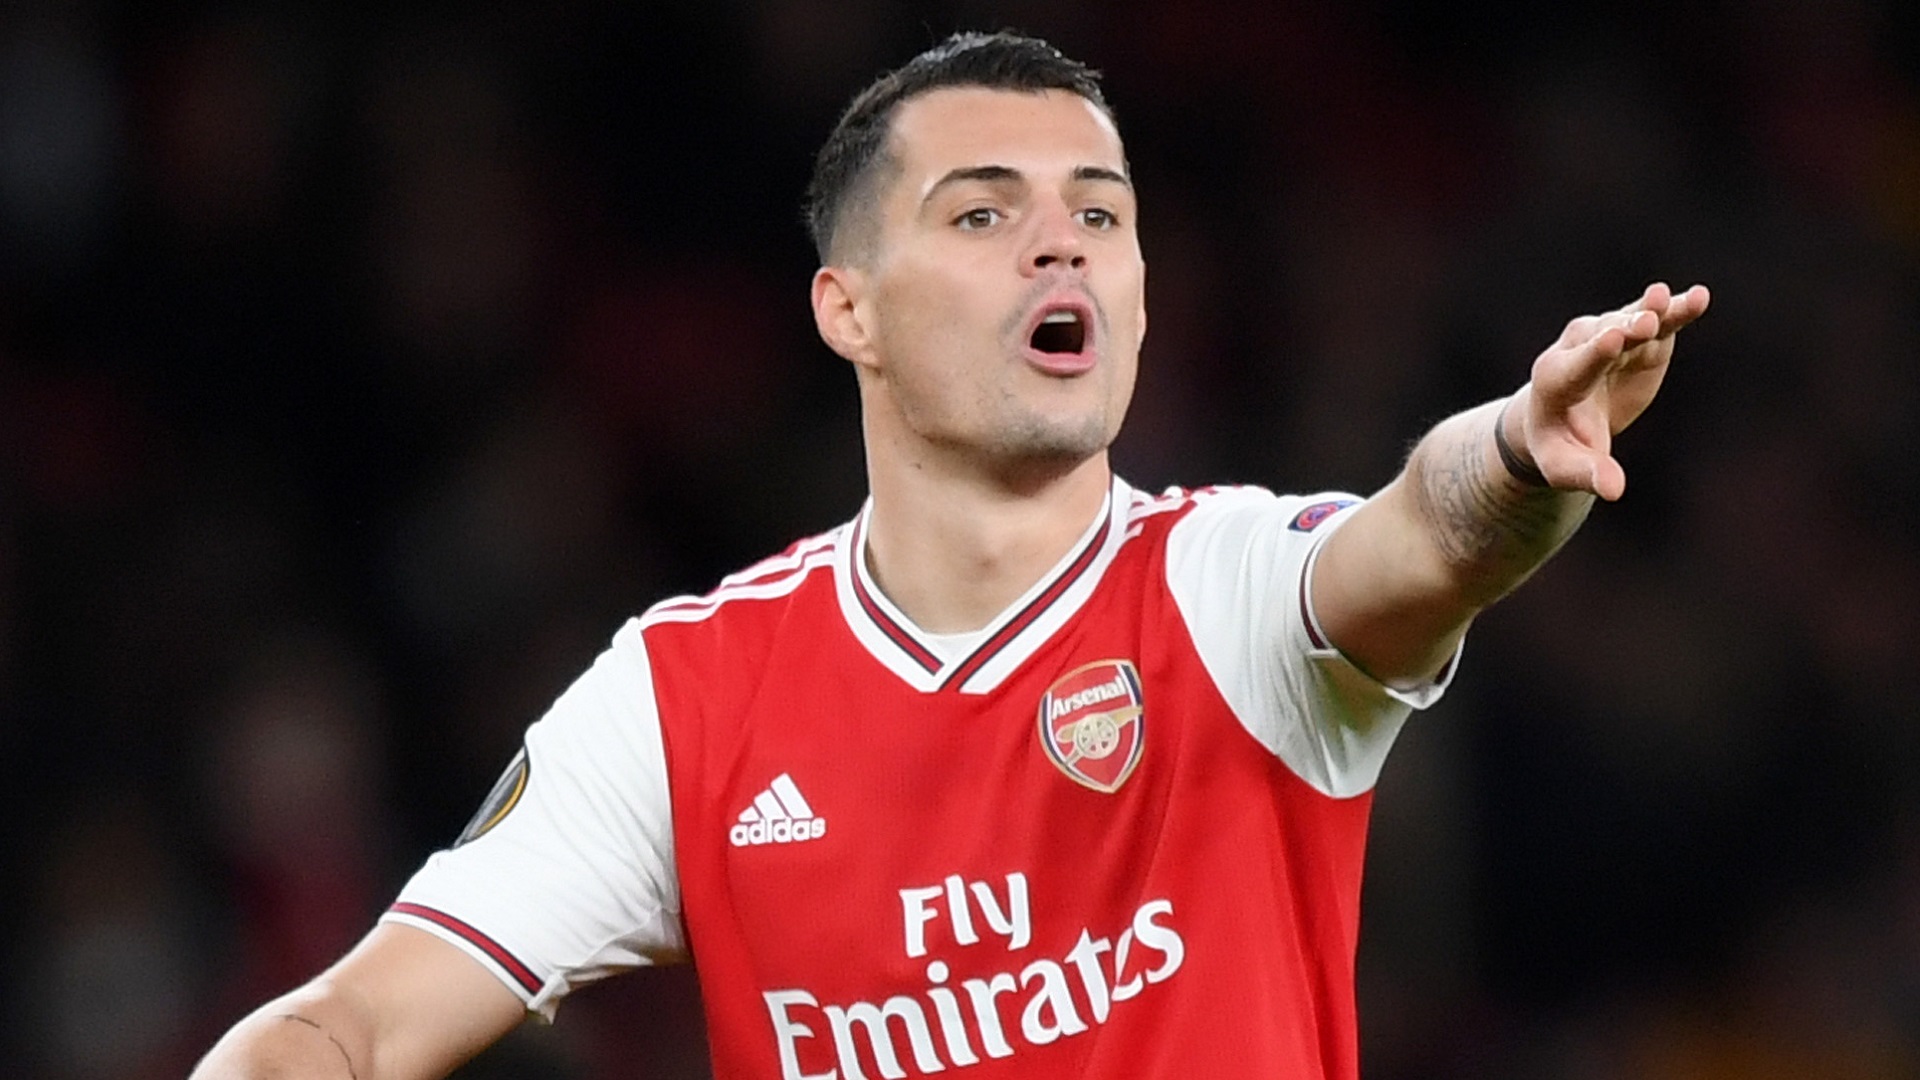 Transfer news and rumours LIVE: Arsenal want â‚¬40m for Xhaka